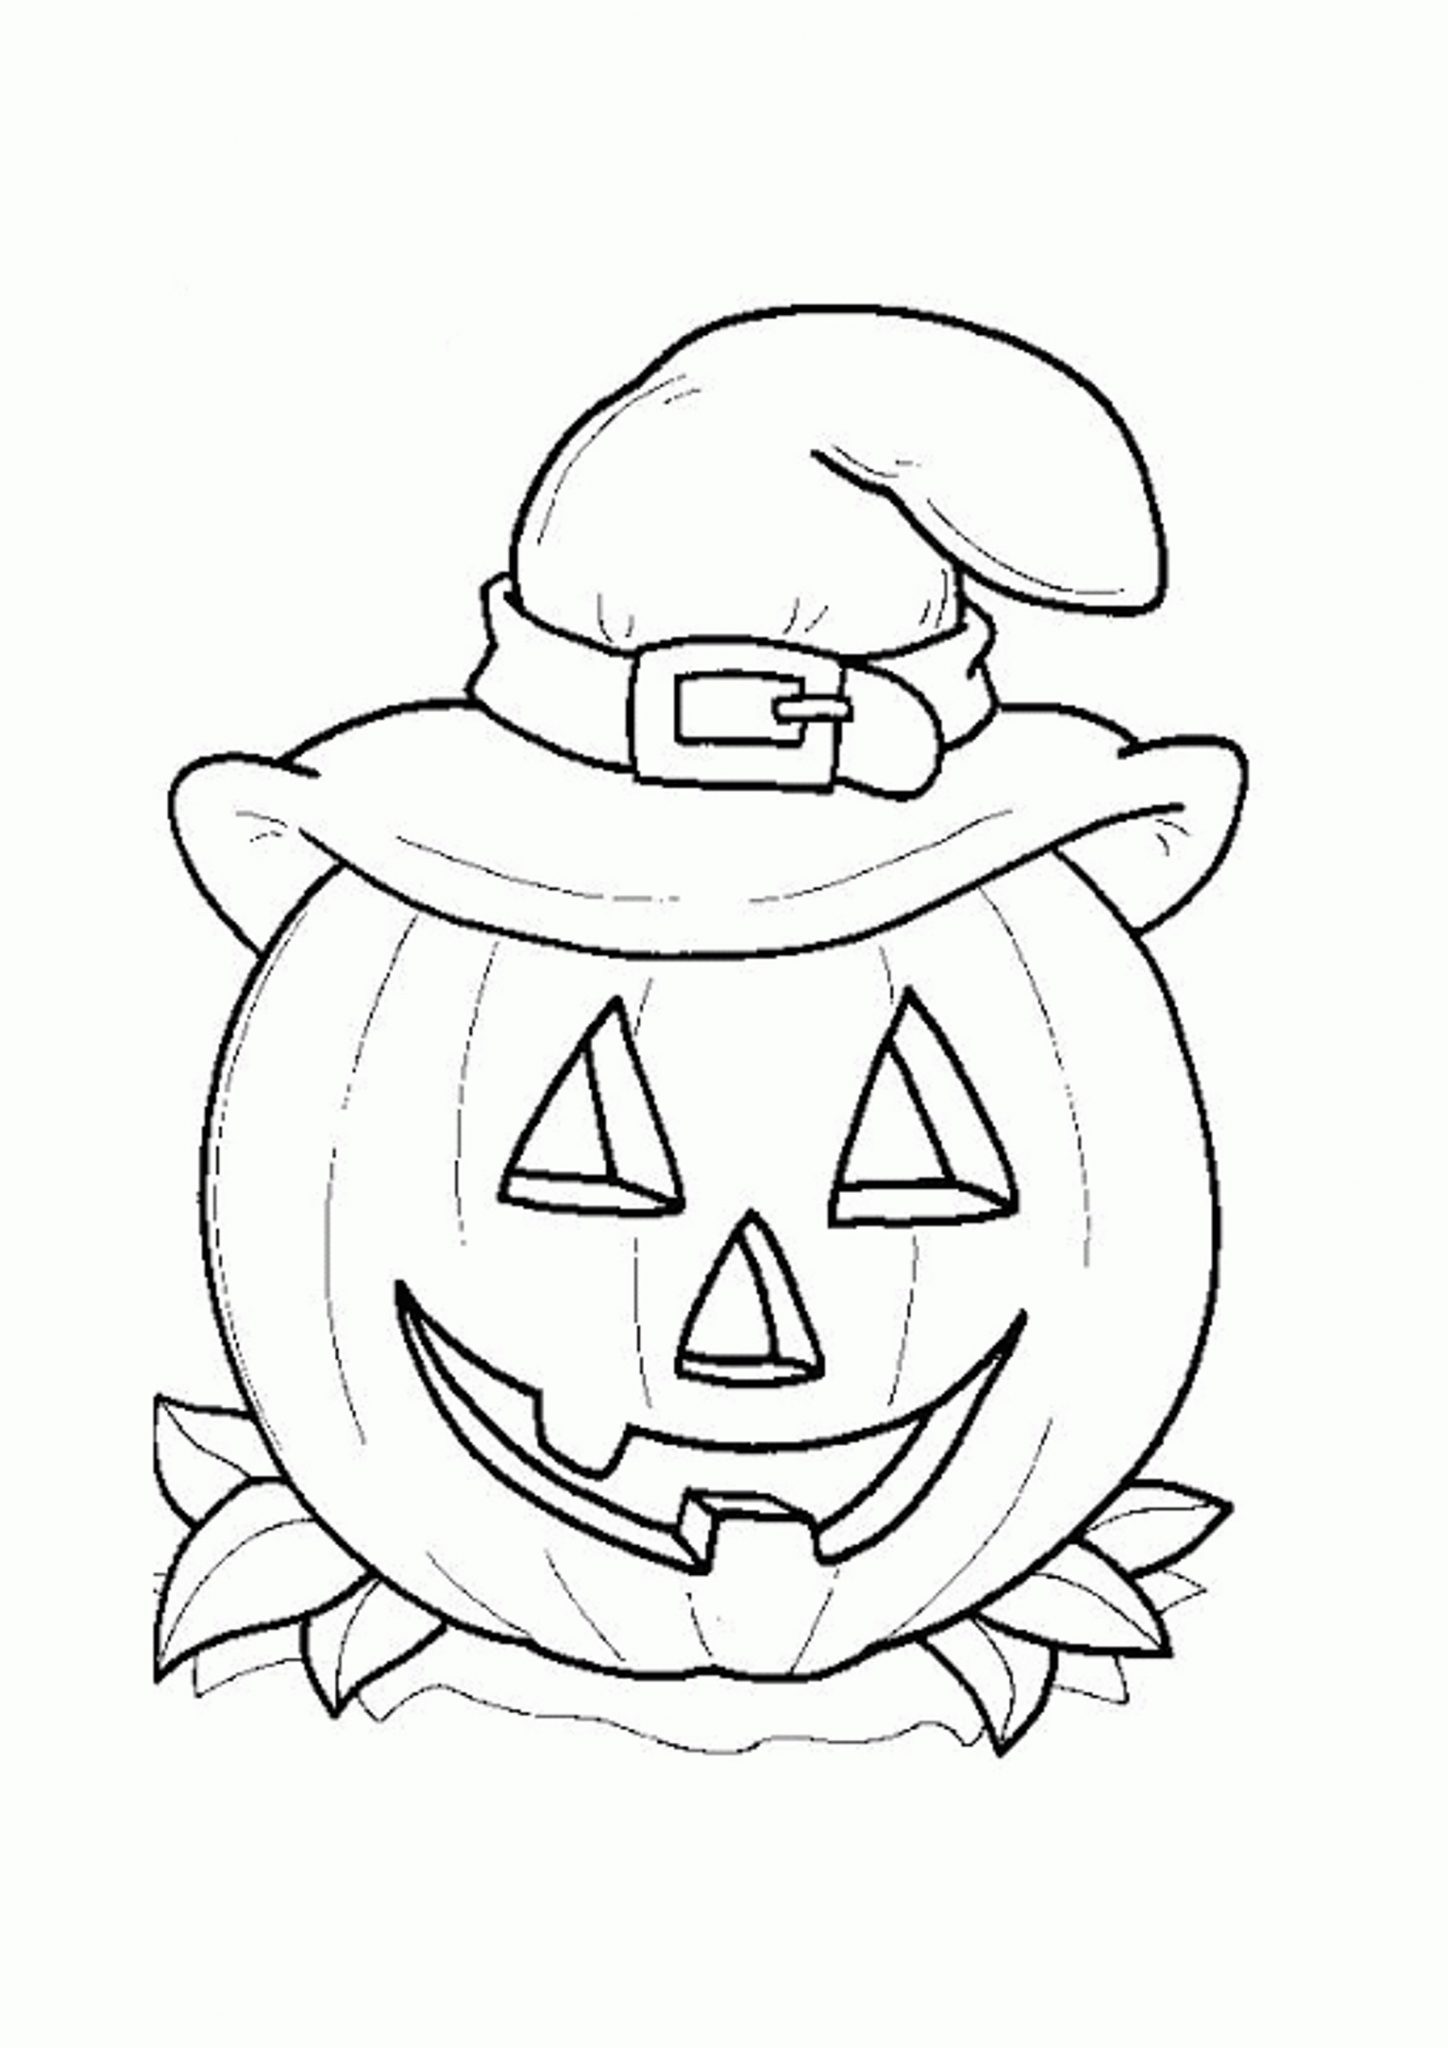 Pumpkin Coloring Pages For Kids - Coloring